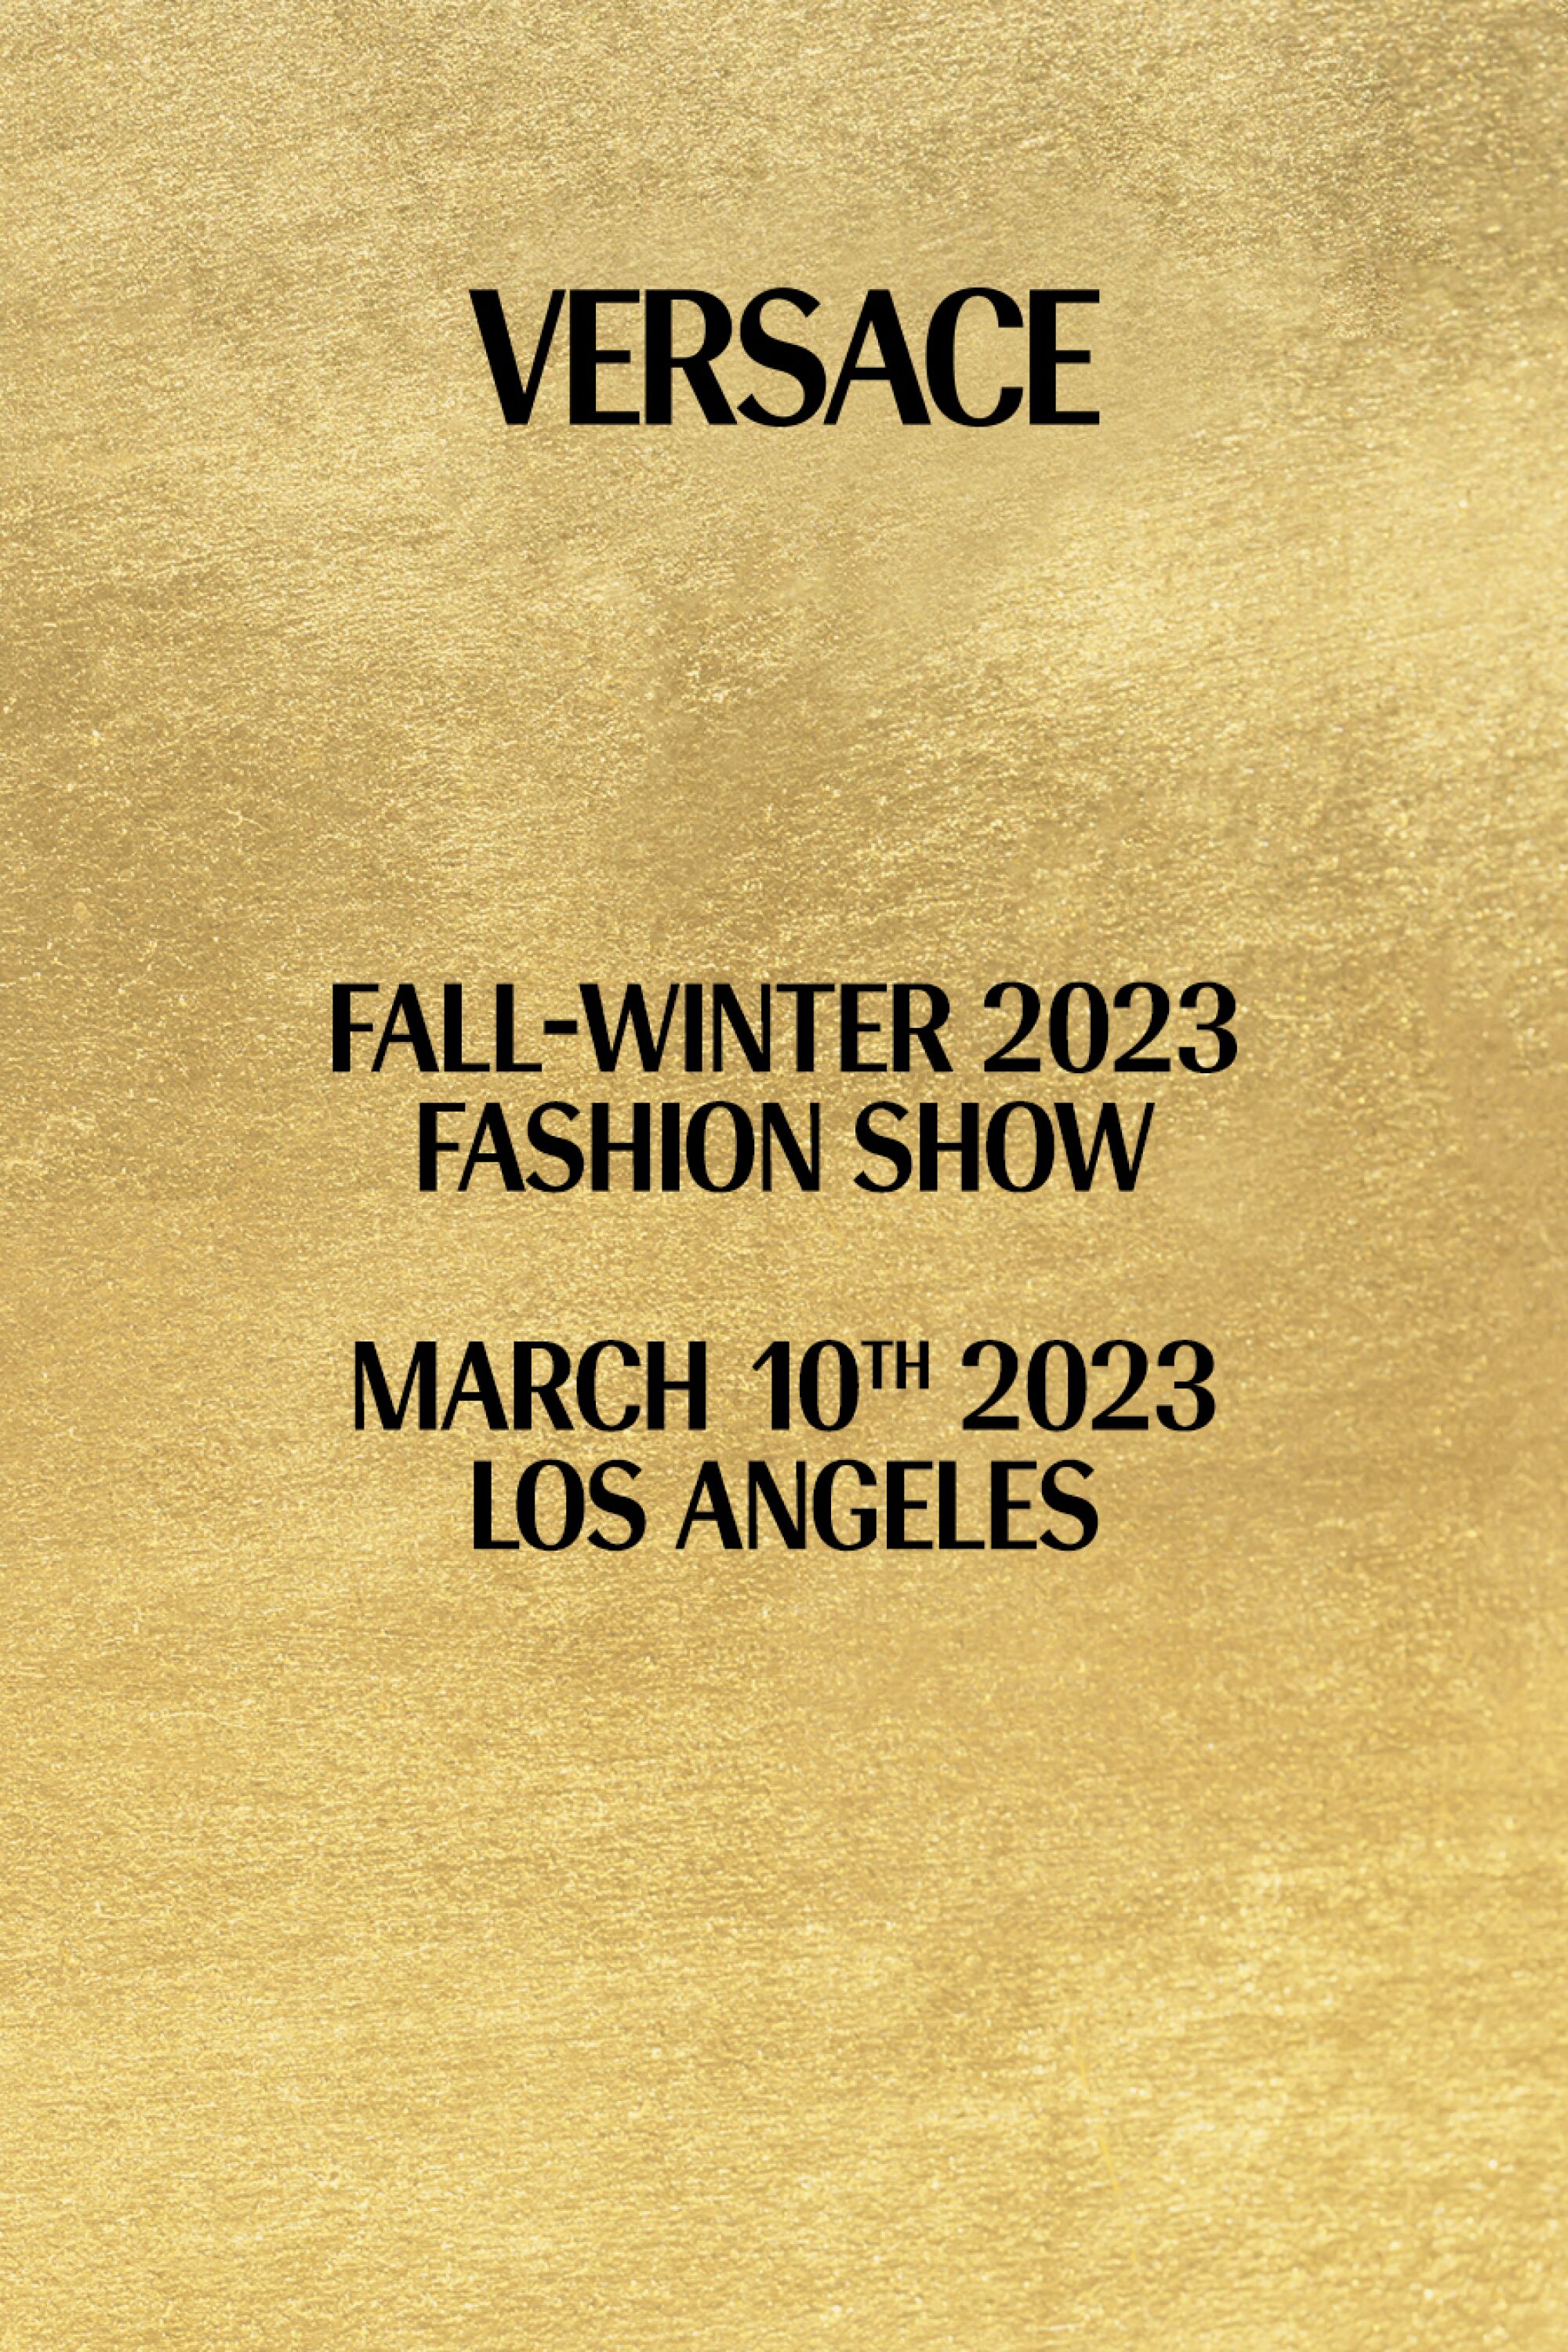 A gold flyer for Versace's fall-winter 2023 fashion show on March 10 in Los Angeles.